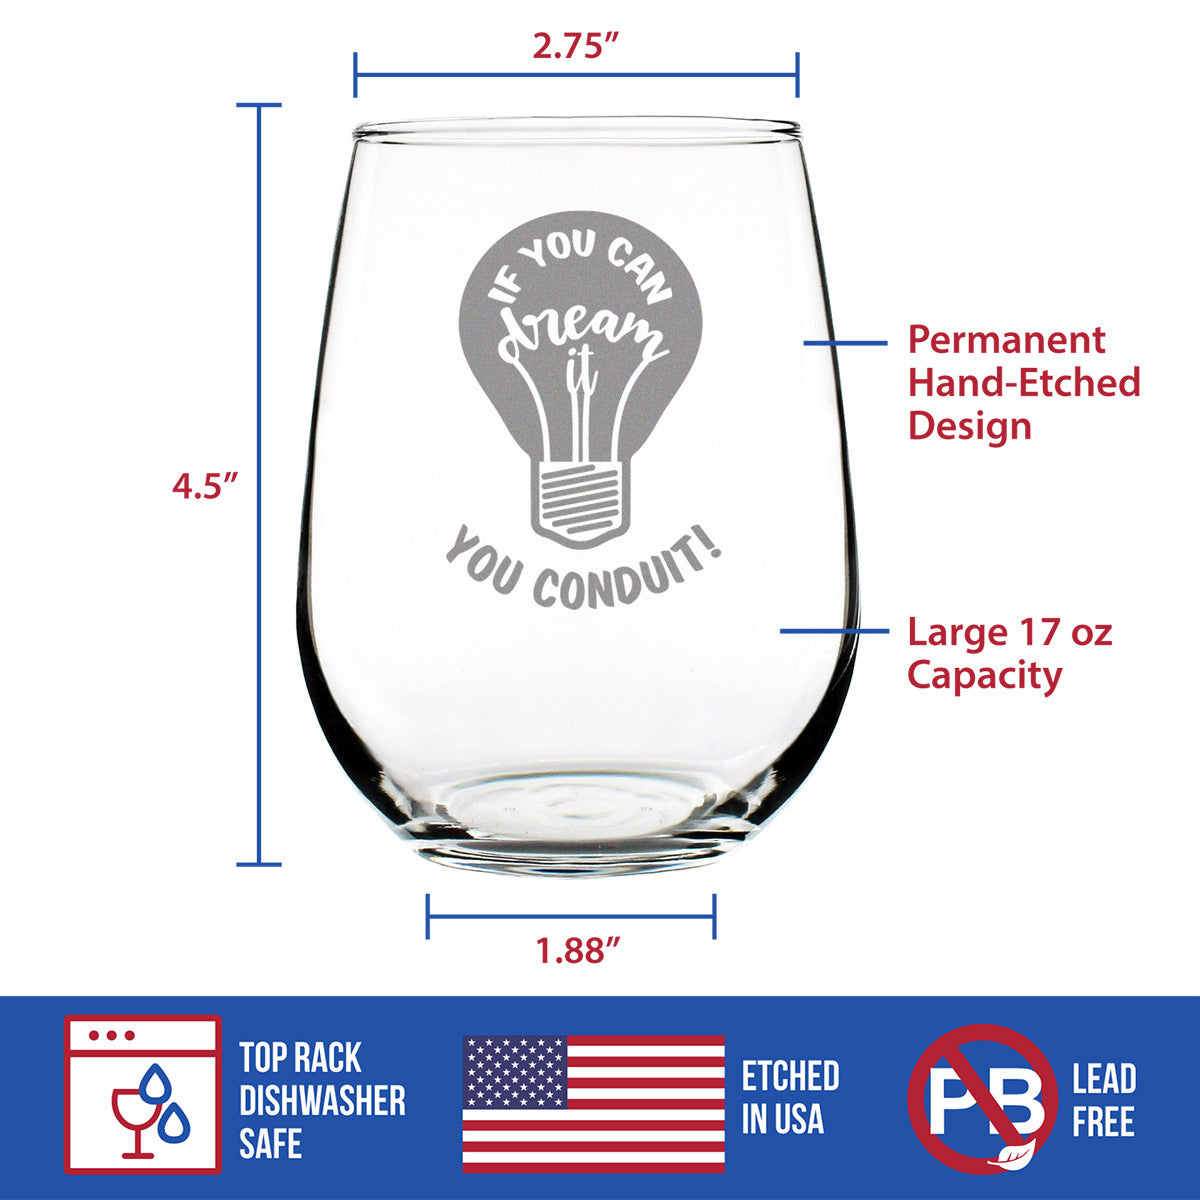 If You Can Dream You Conduit - Stemless Wine Glass - Funny Electrician Gifts for Journeyman - Large 17 Oz Glass